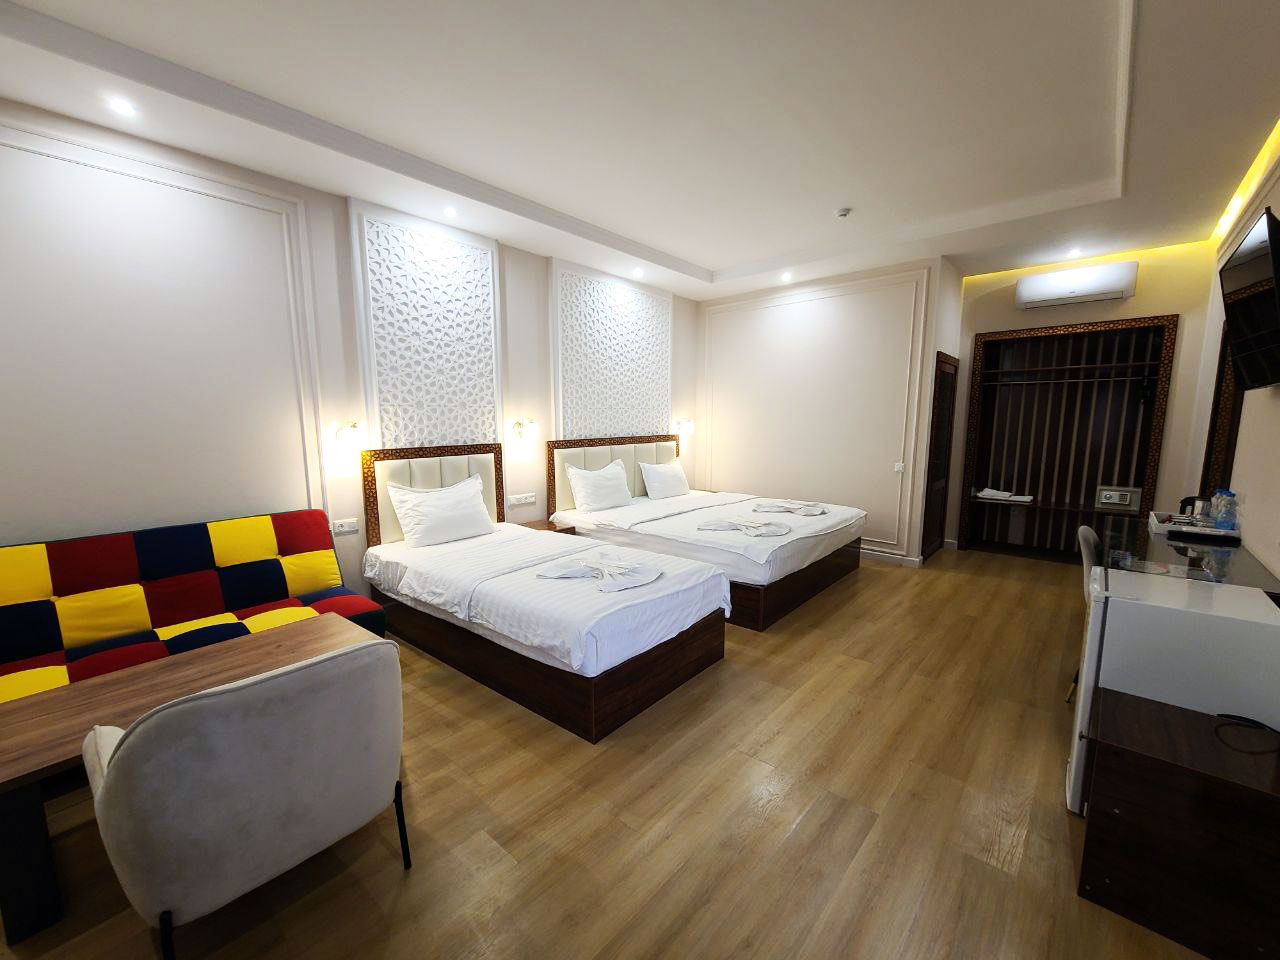 Comfortable deluxe family room in hotel with a double bed, desk, sofa, and coffee table